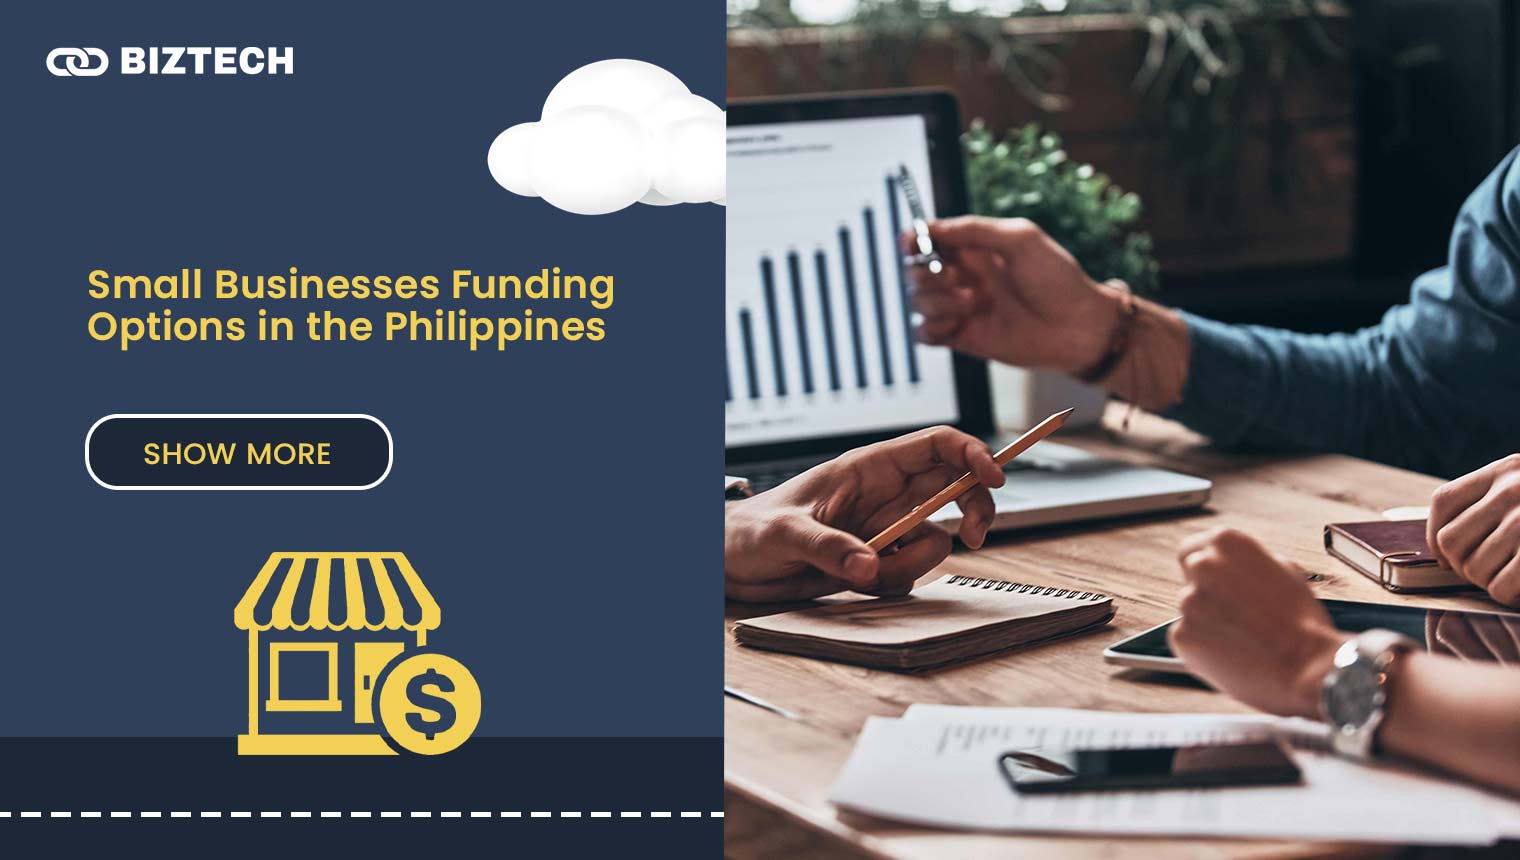 Small Businesses Financing Options in the Philippines